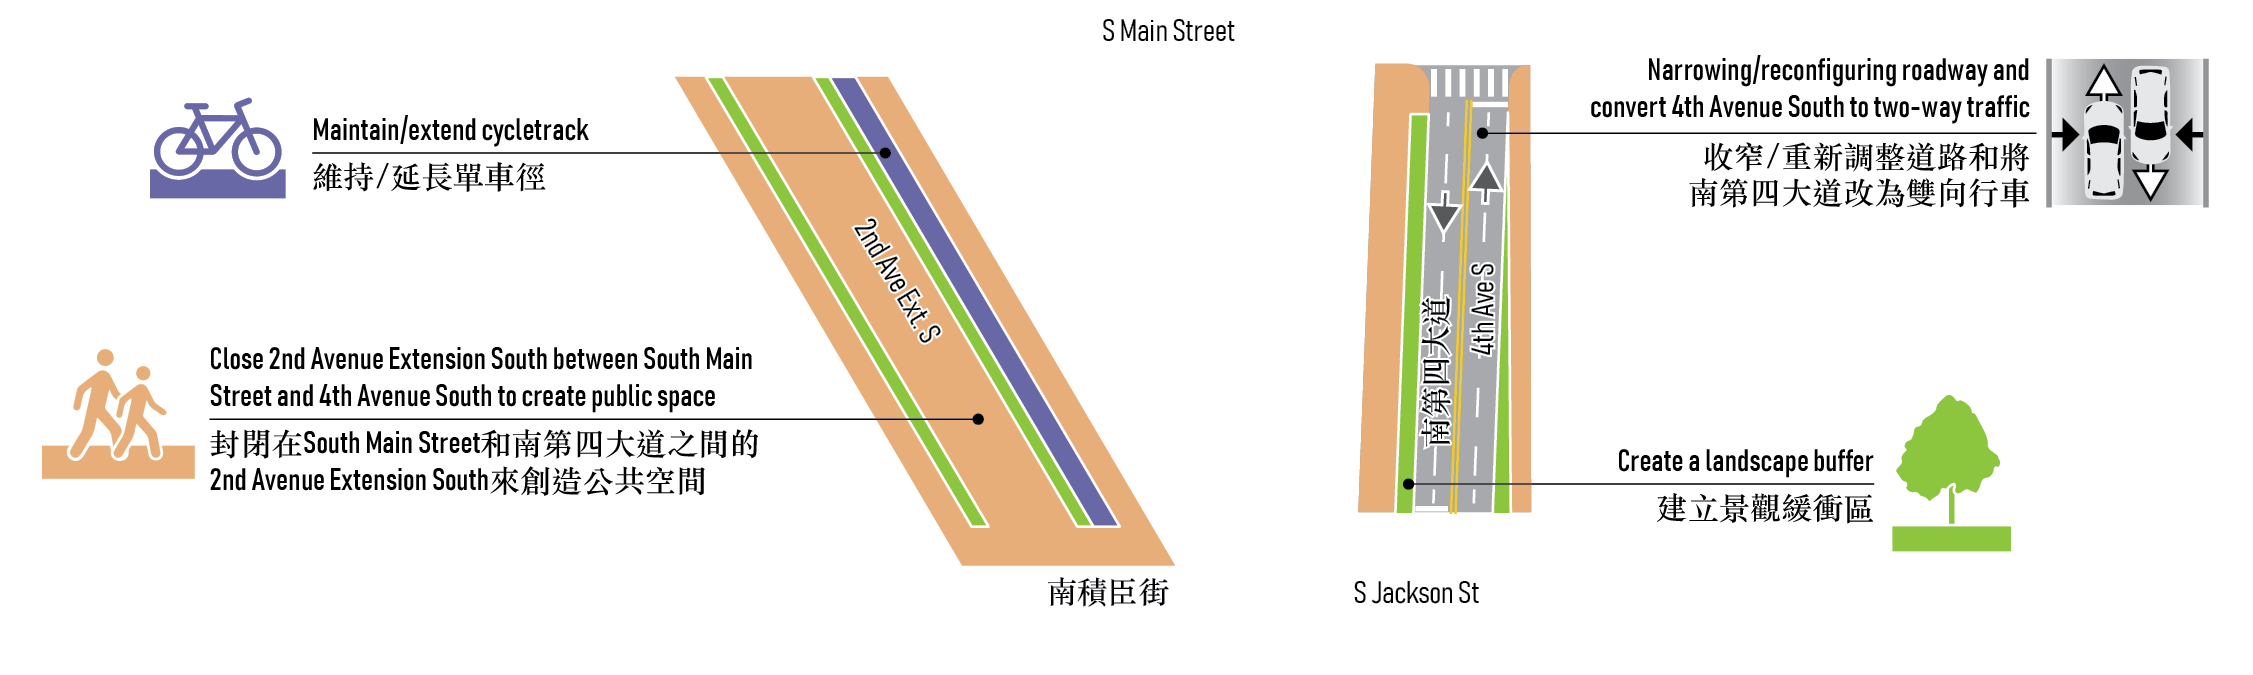 Illustration showing the second street transformation option for 2nd Avenue Extension South and 4th Avenue. This proposed transformation would improve access to downtown to the north, and would transform 2nd Avenue Extension South and 4th Avenue north of Jackson Street, but not to the south of Jackson street like the first street transformation option would. This street transformation would also close vehicle traffic to 2nd Avenue Extension south in the portion north of South Jackson Street, which is shown with orange shading. It would also make the same improvements to the first transformation option, including creating landscape buffers on 2nd Avenue Extension South and 4th Avenue, and extending the bike lane on 2nd Avenue Extension. It would also narrow/reconfigure roadway traffic on 4th Avenue.  